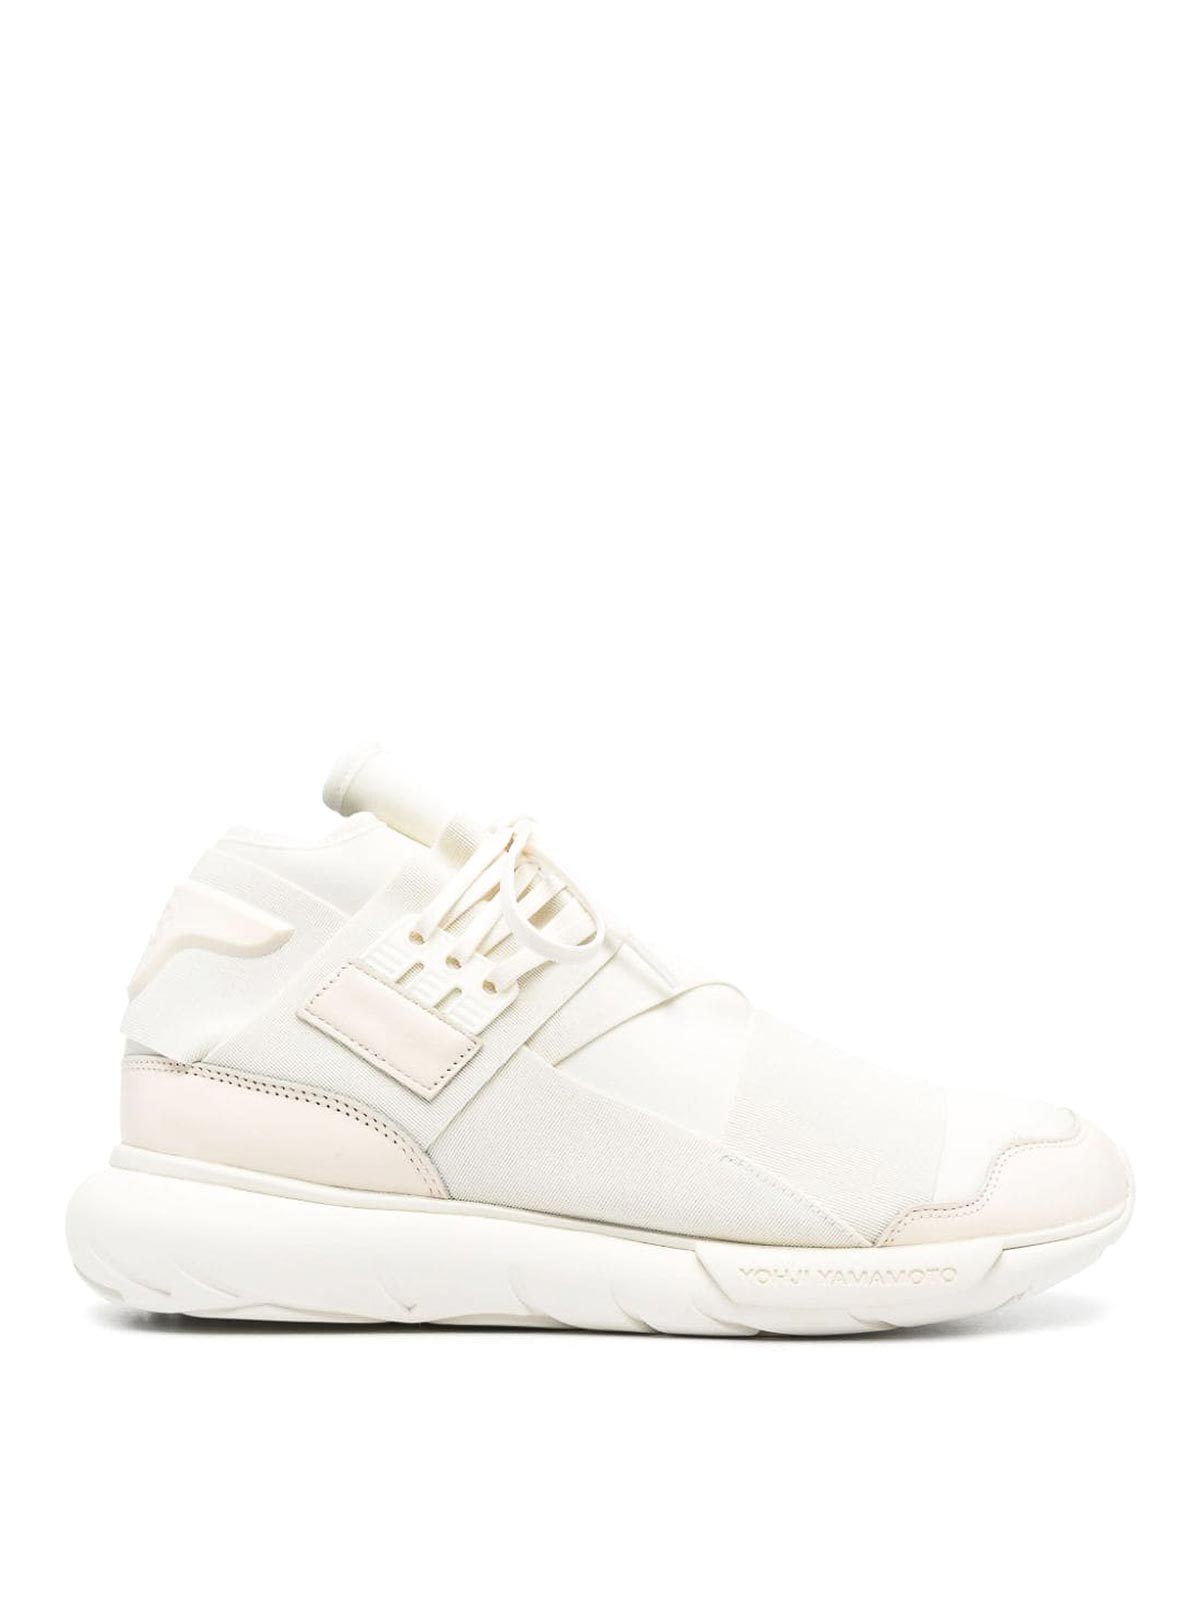 Trainers Y-3 - Y-3 qasa sneakers - ID2927 | Shop online at THEBS [iKRIX]